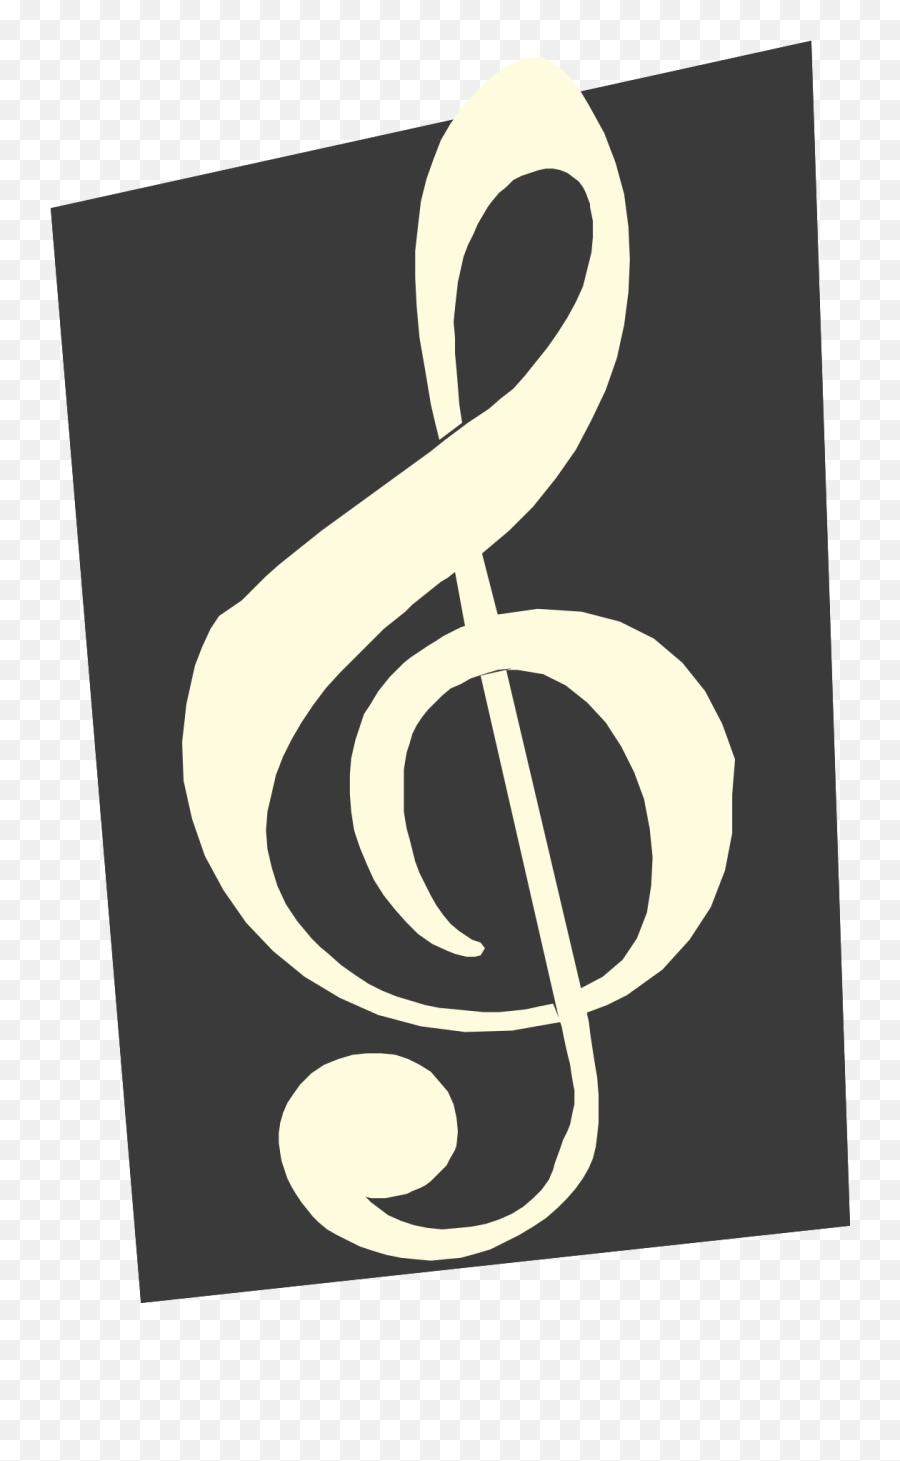 Free Music Symbol 1207759 Png With Transparent Background - Clipart Music Notes Black Background,Bass Clef Icon